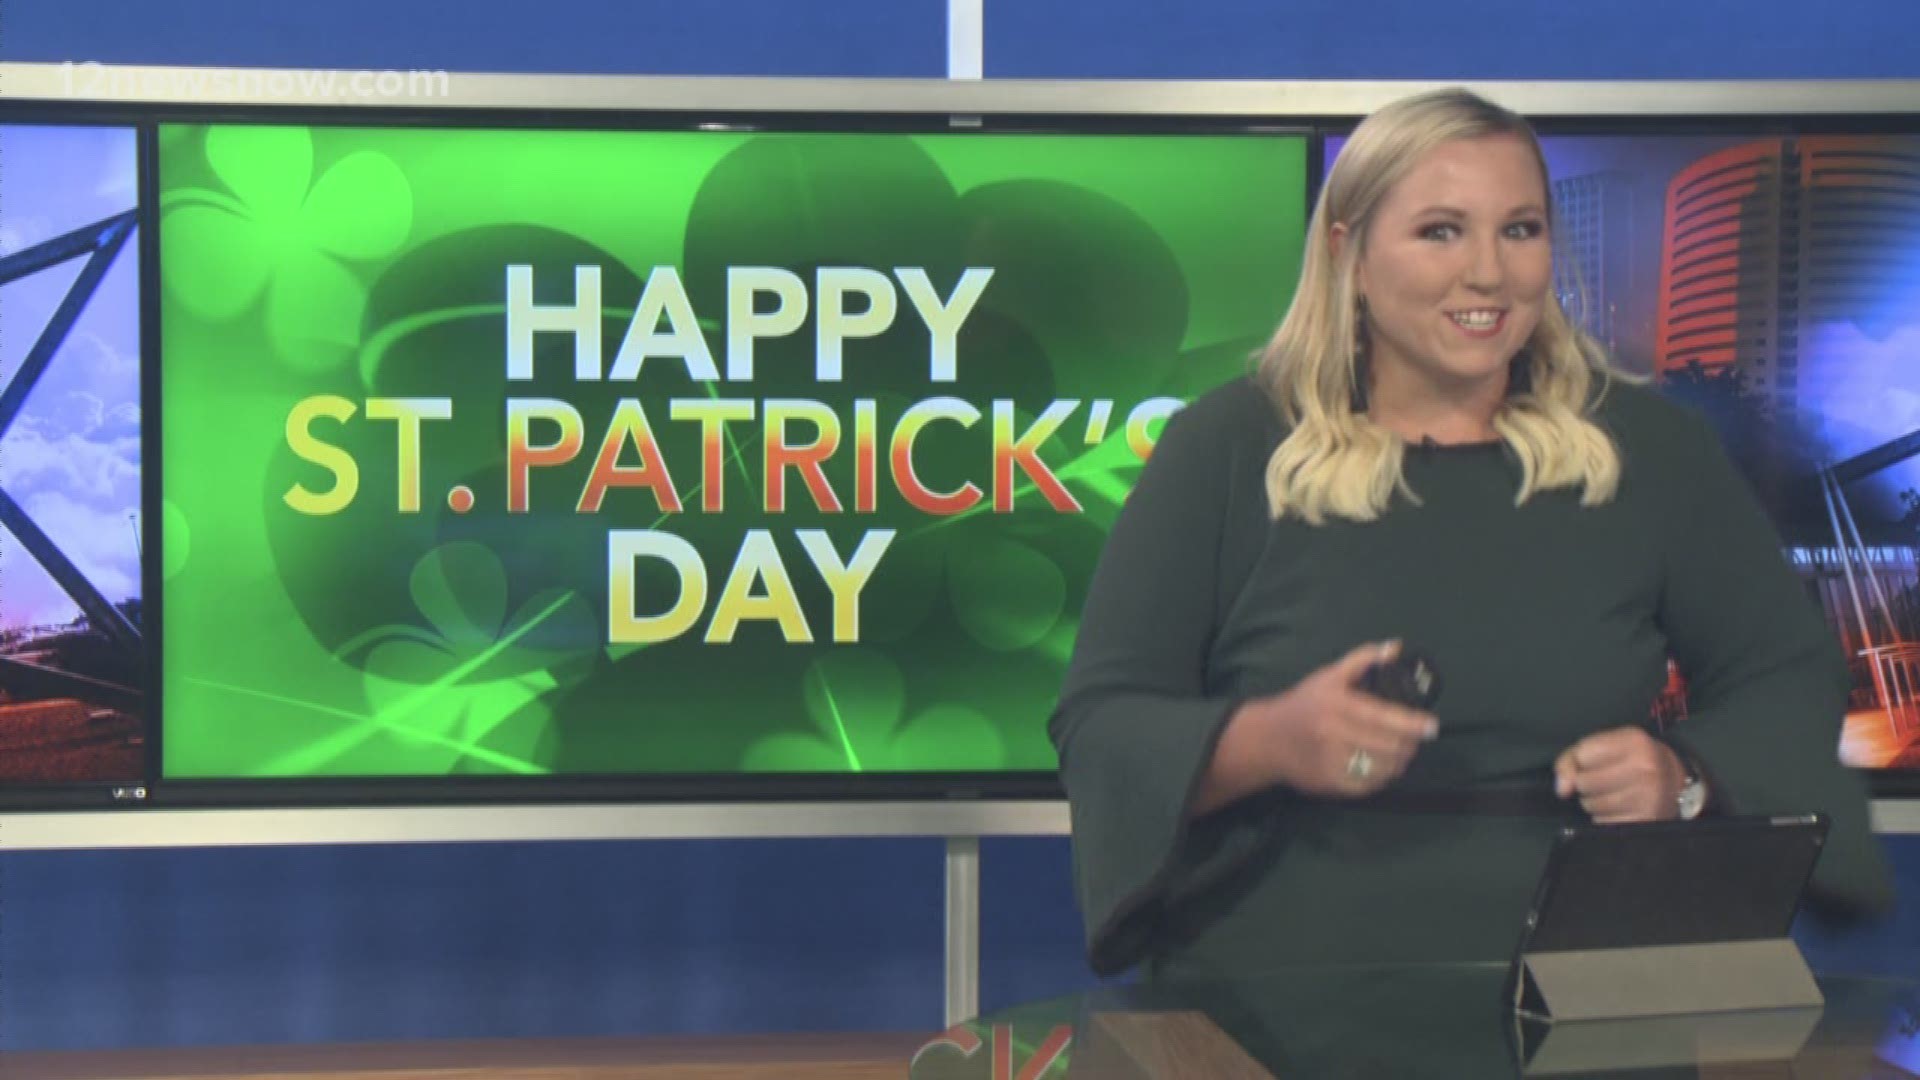 12News weekend crew celebrates St. Patrick's day with song and dance.